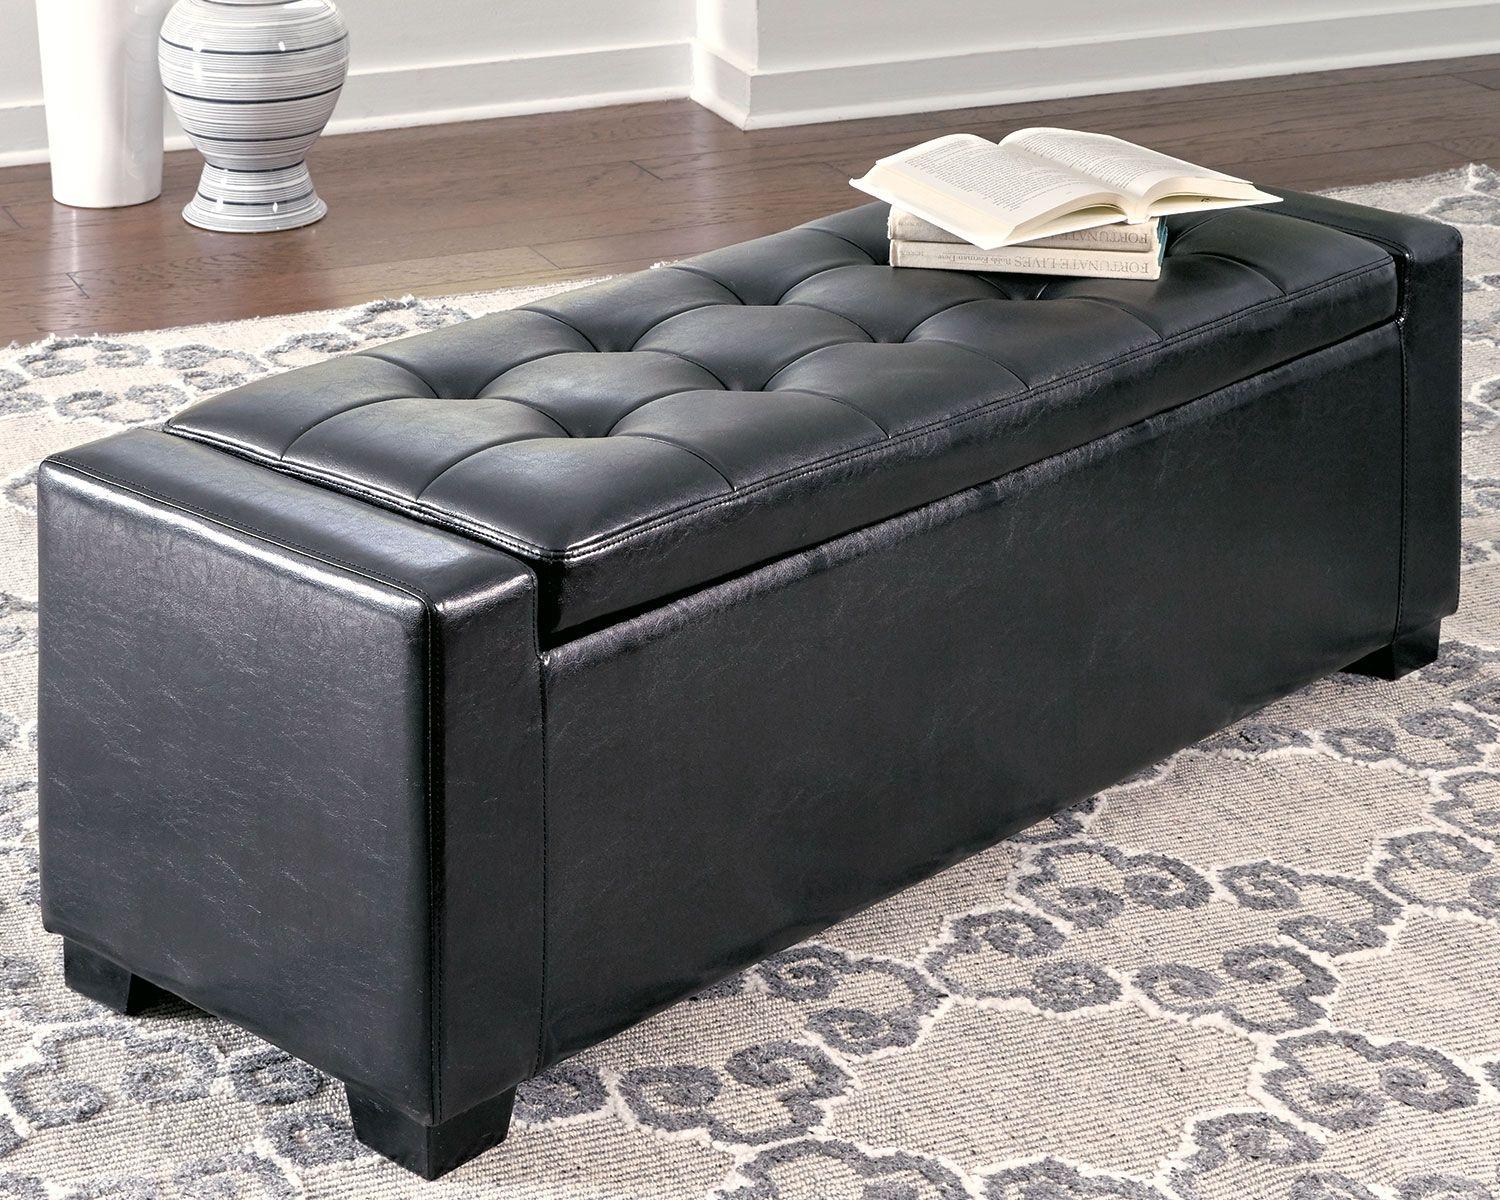 Ashley Furniture - Benches - Black - Upholstered Storage Bench - Faux Leather - 5th Avenue Furniture